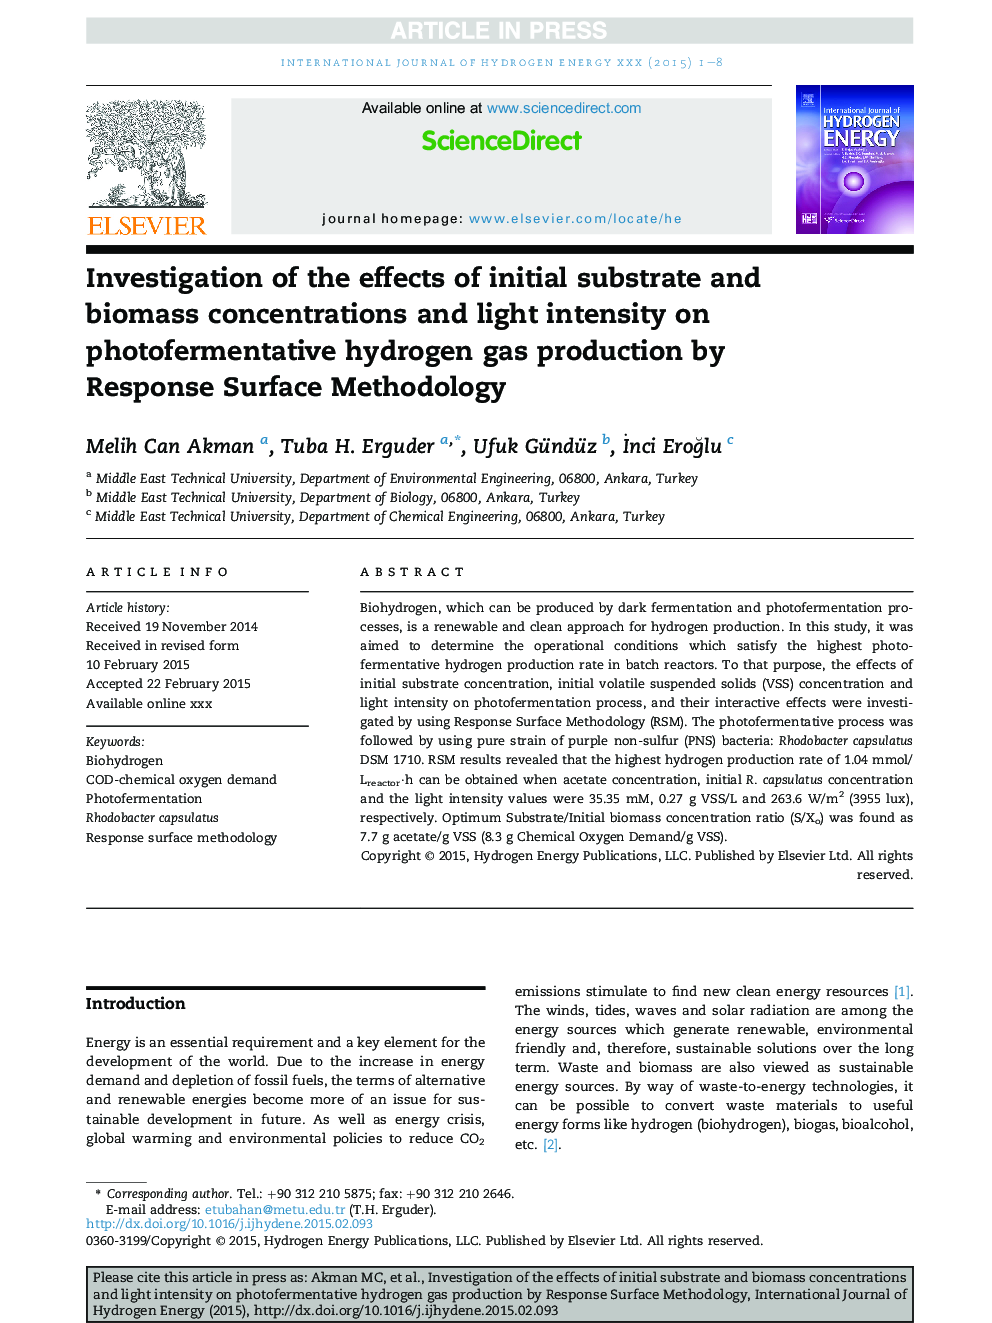 Investigation of the effects of initial substrate and biomass concentrations and light intensity on photofermentative hydrogen gas production by Response Surface Methodology